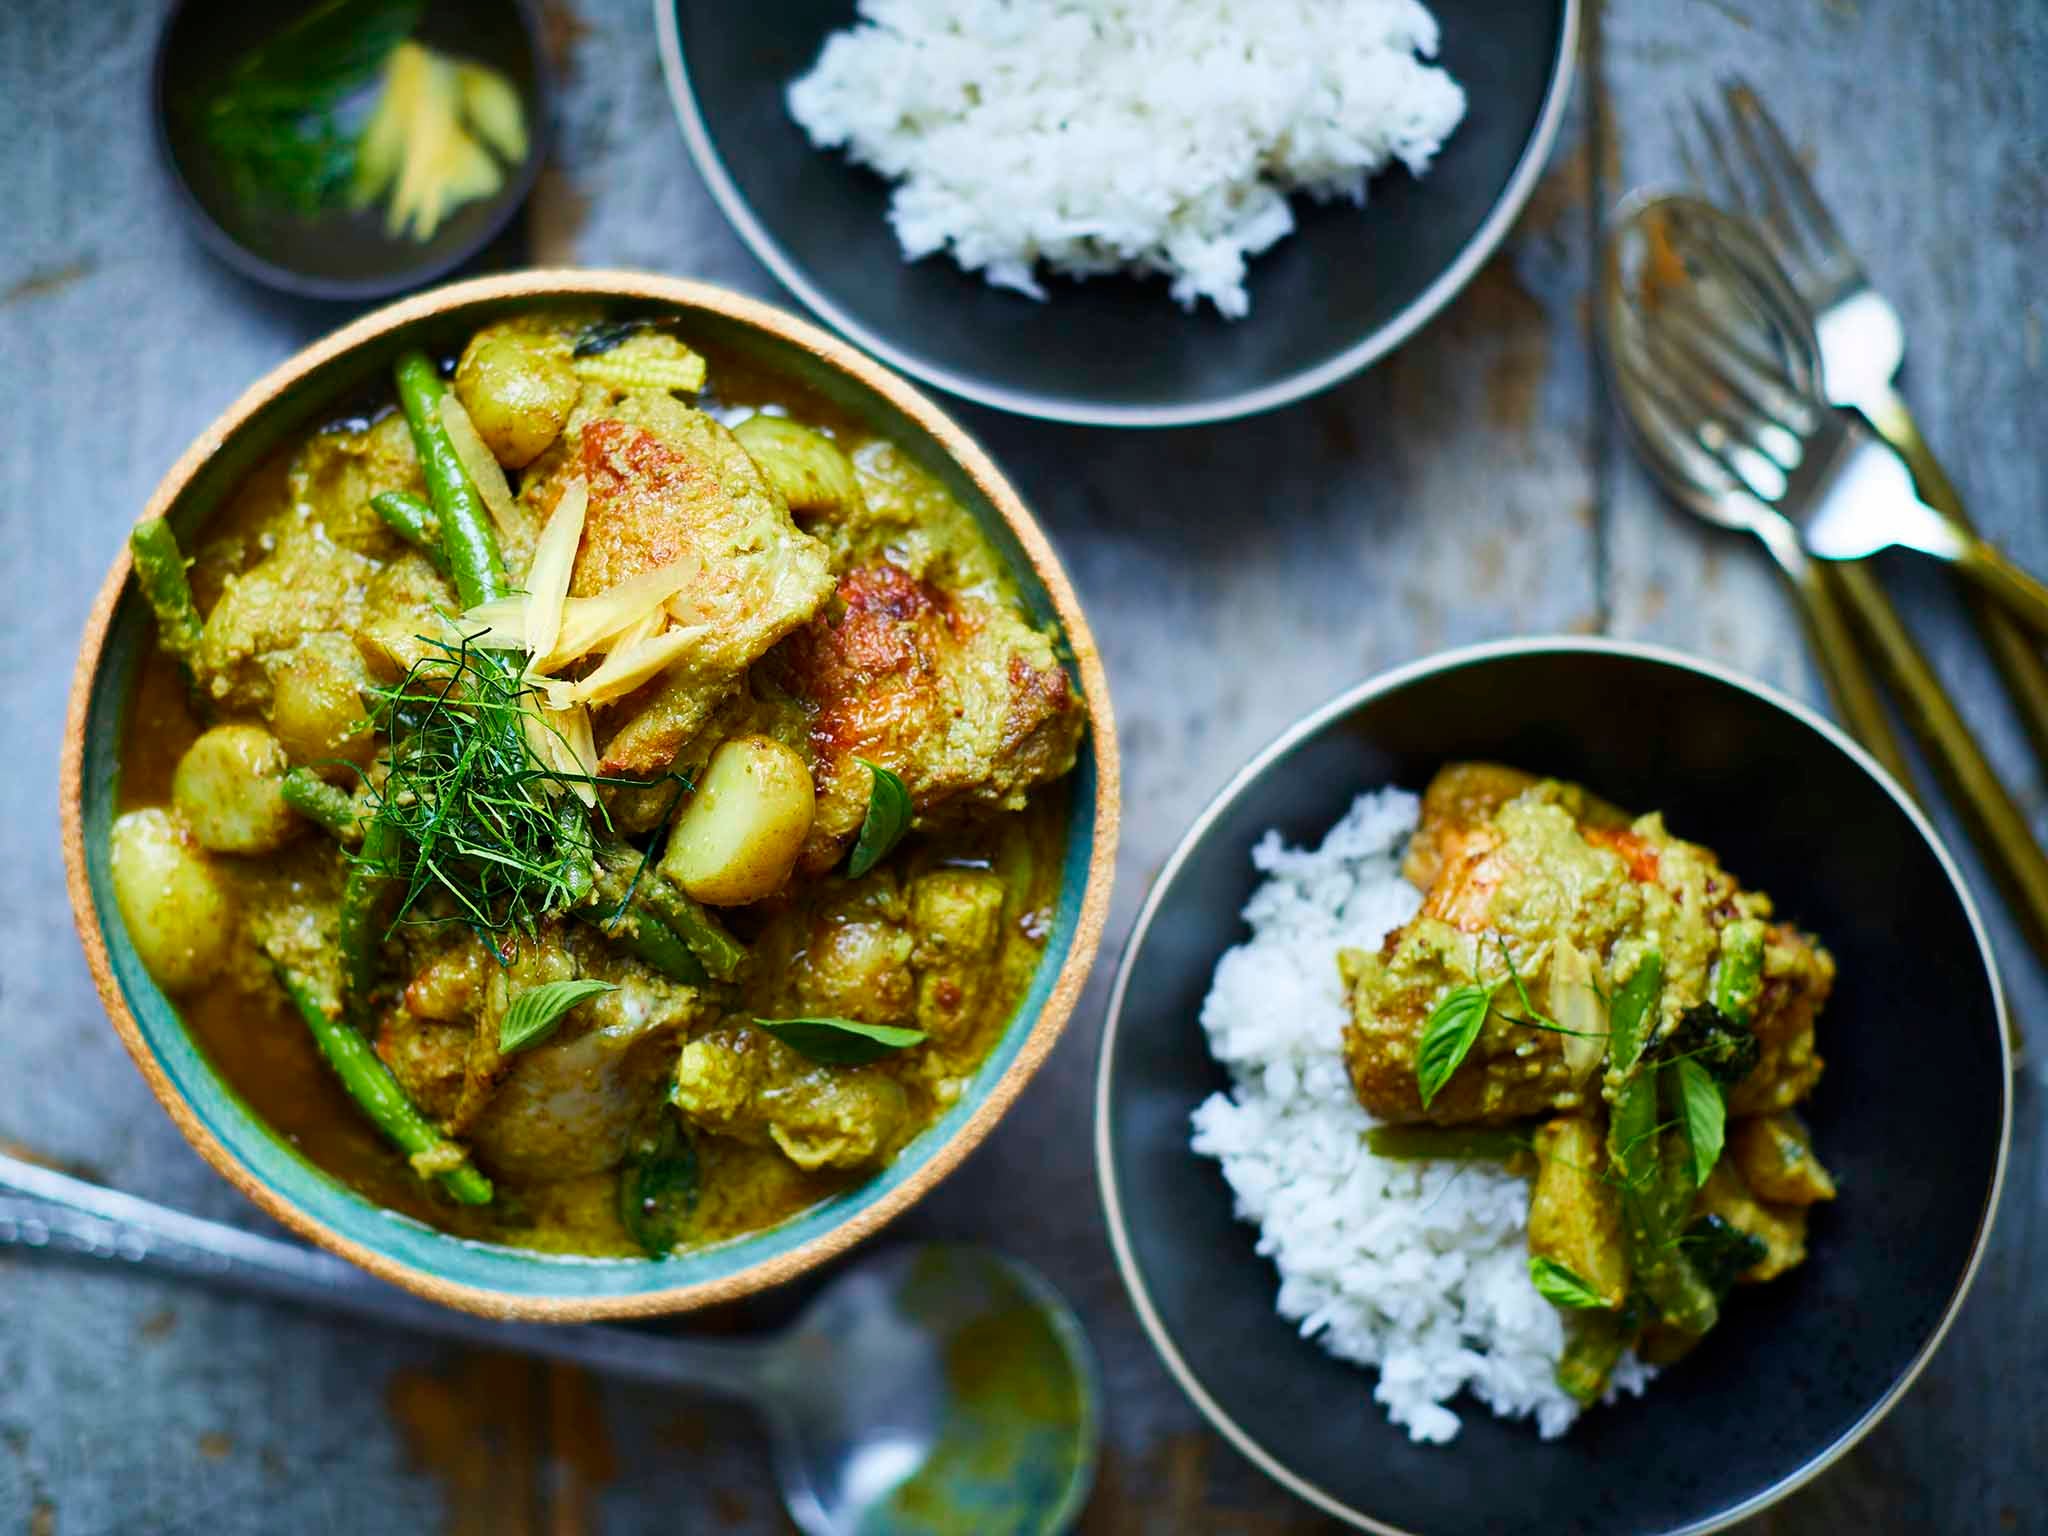 Marinating the chicken packs this green curry full of goodness and flavour